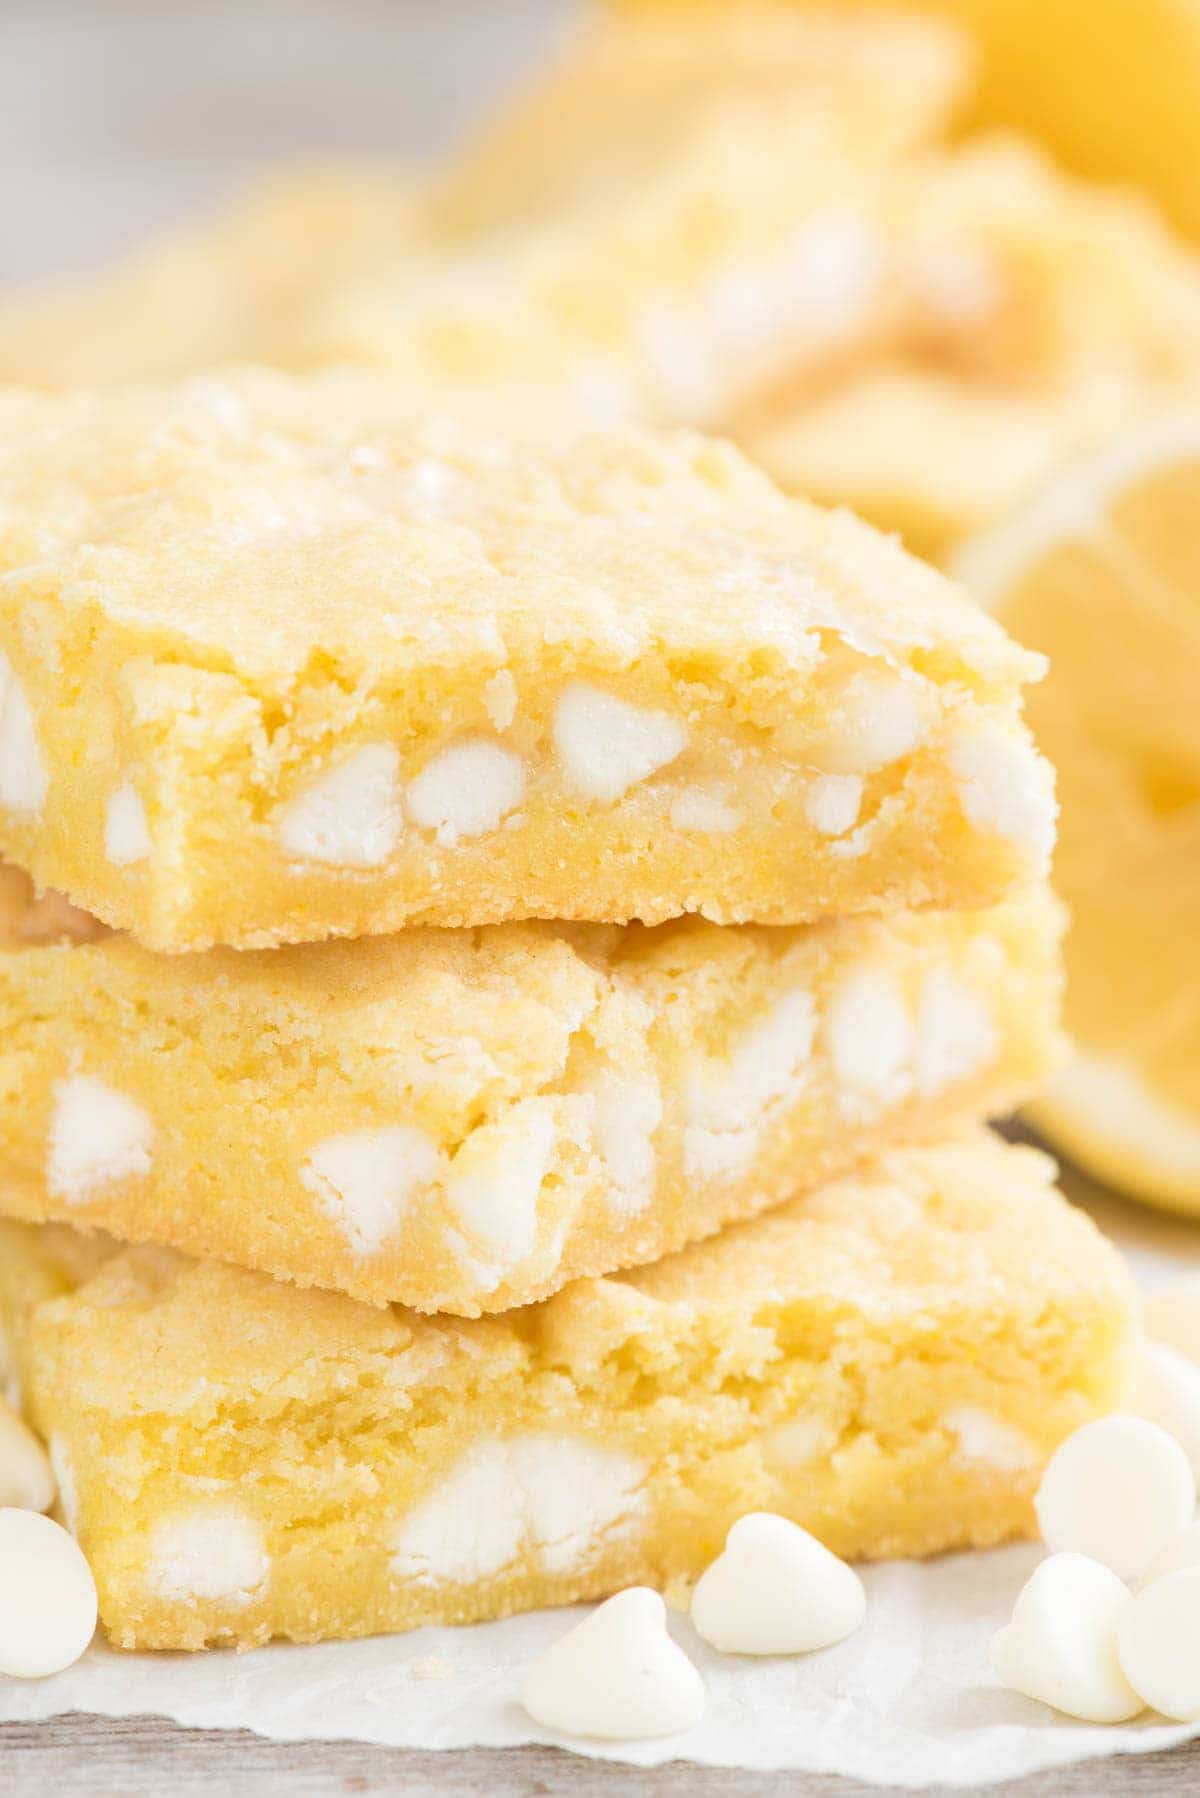 Lemon gooey bar stack on parchment paper with title